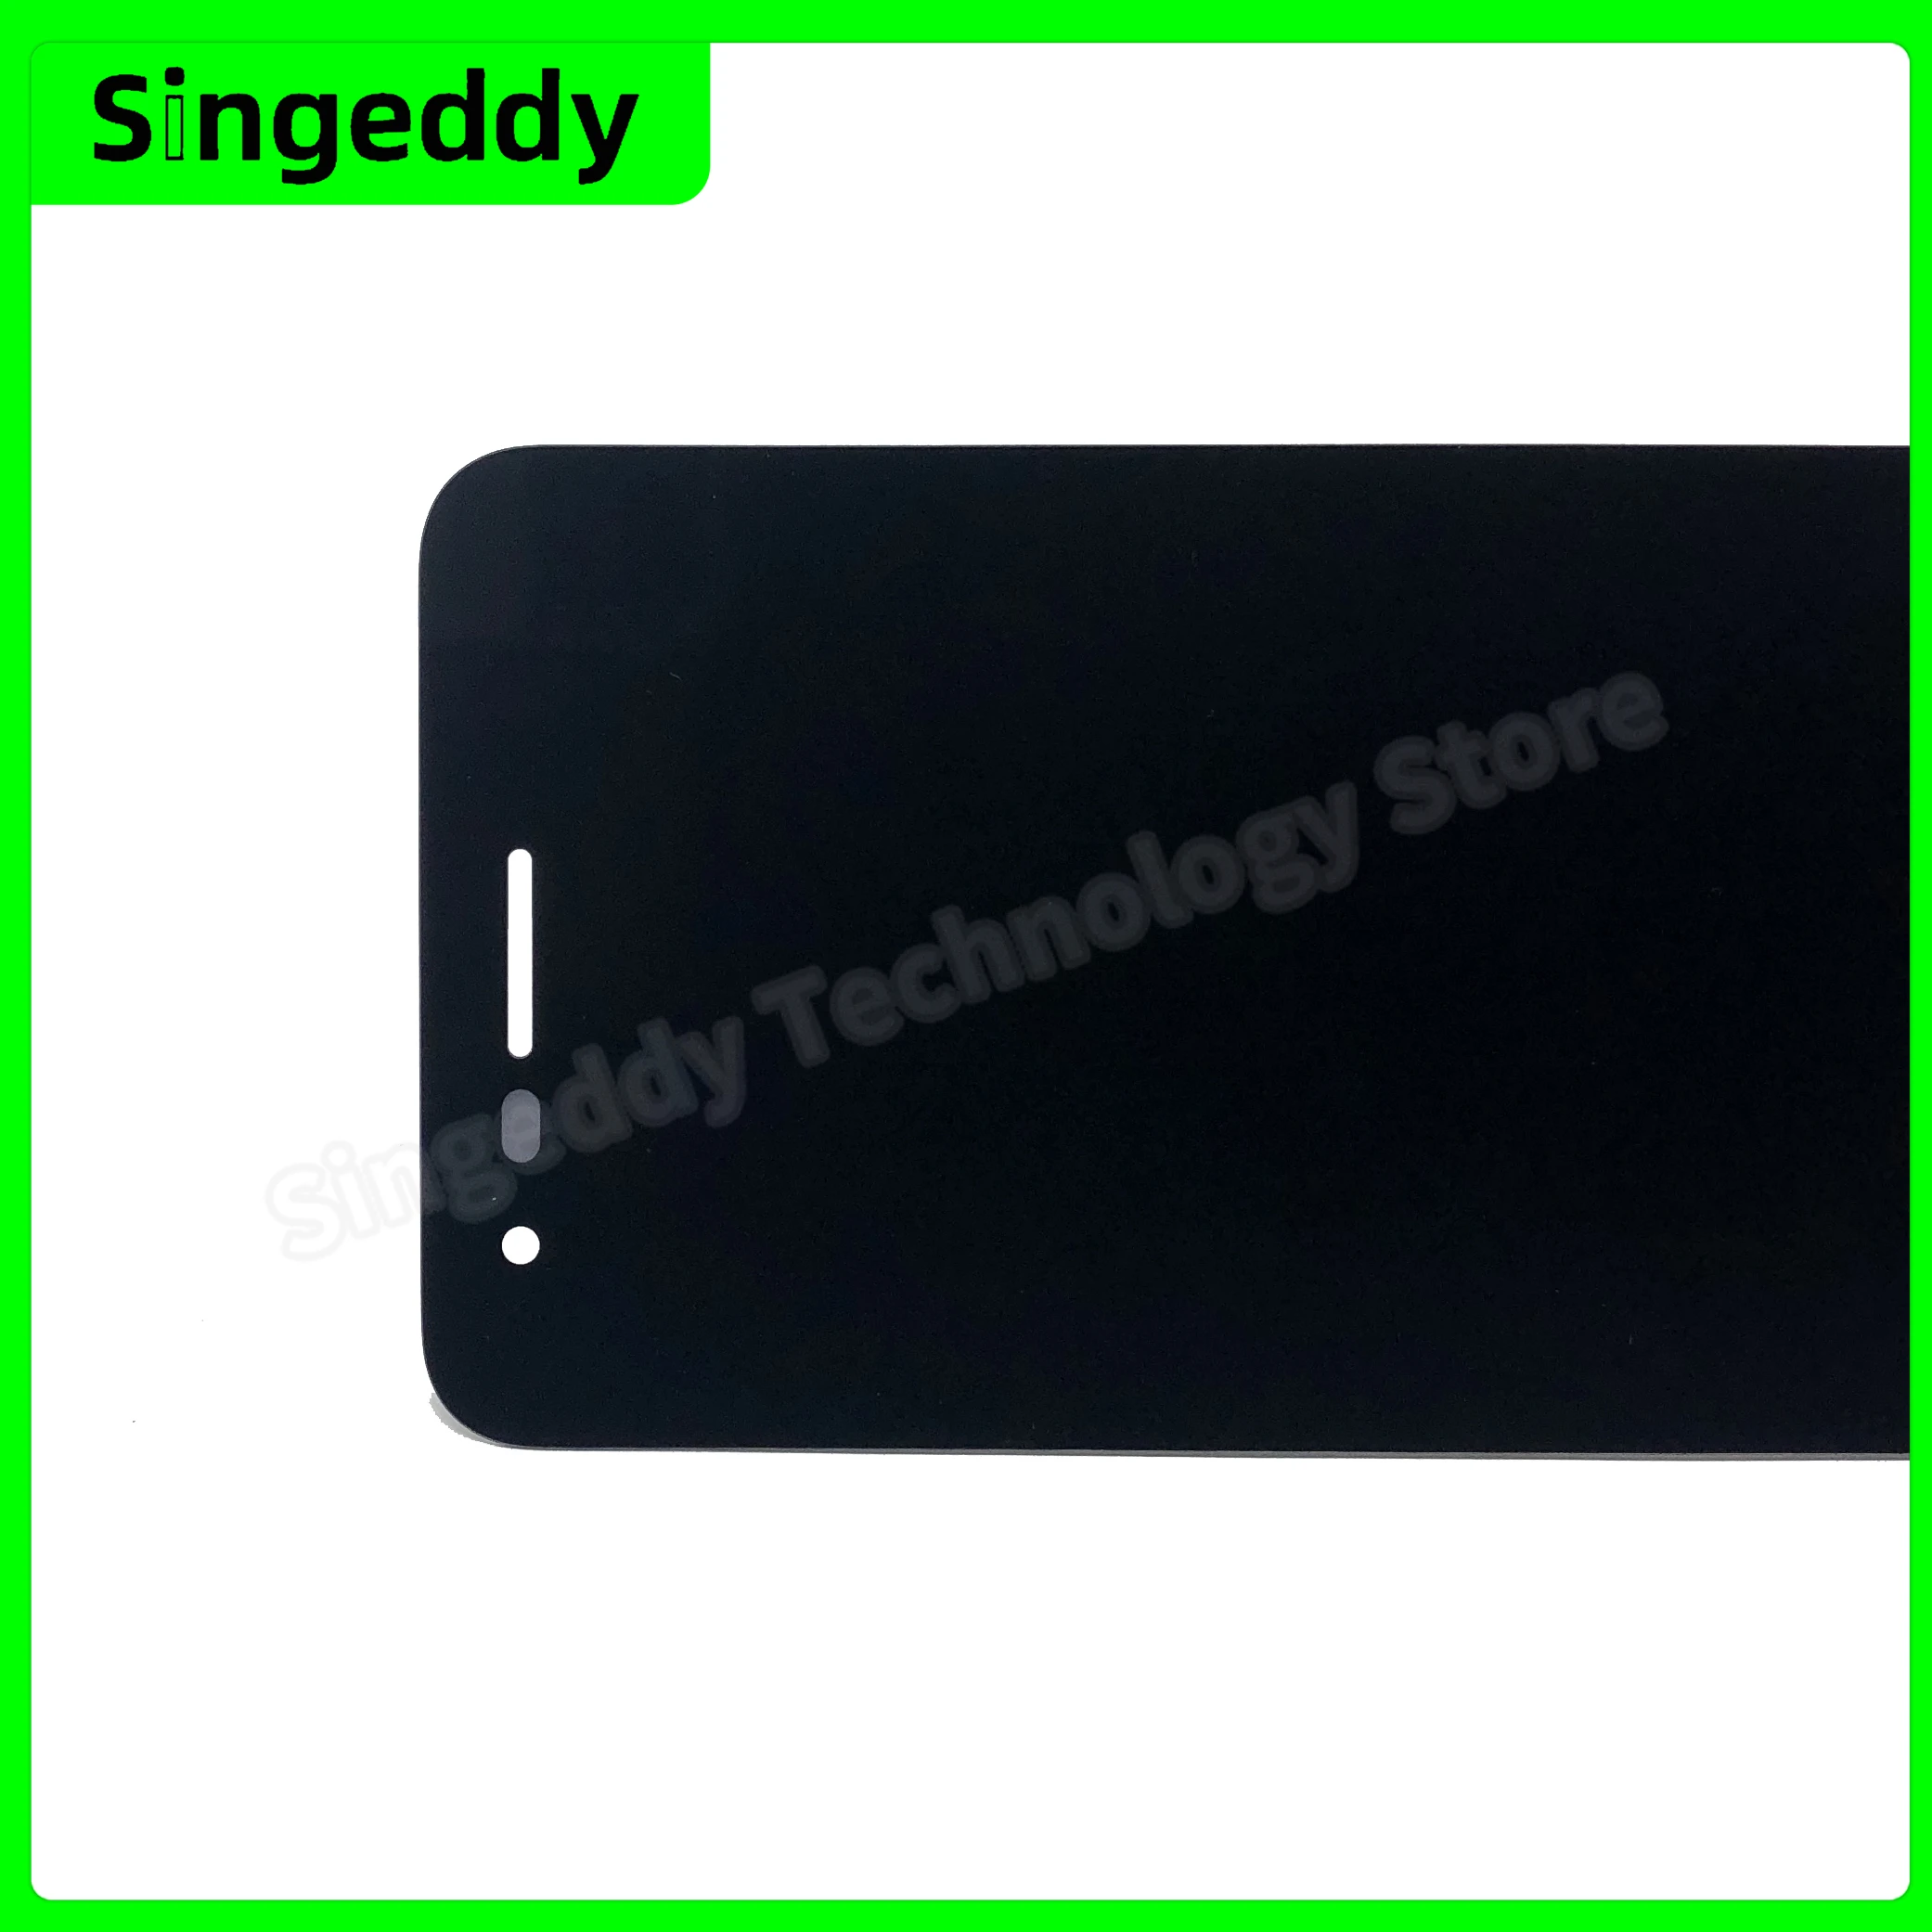 

LCD Complete Display Replacemet For LG K8 2018 LM-X210MA X210TA SP200 K9 X210AM Touch Screen Assembly 5.0'' 1280*720 TFT Black